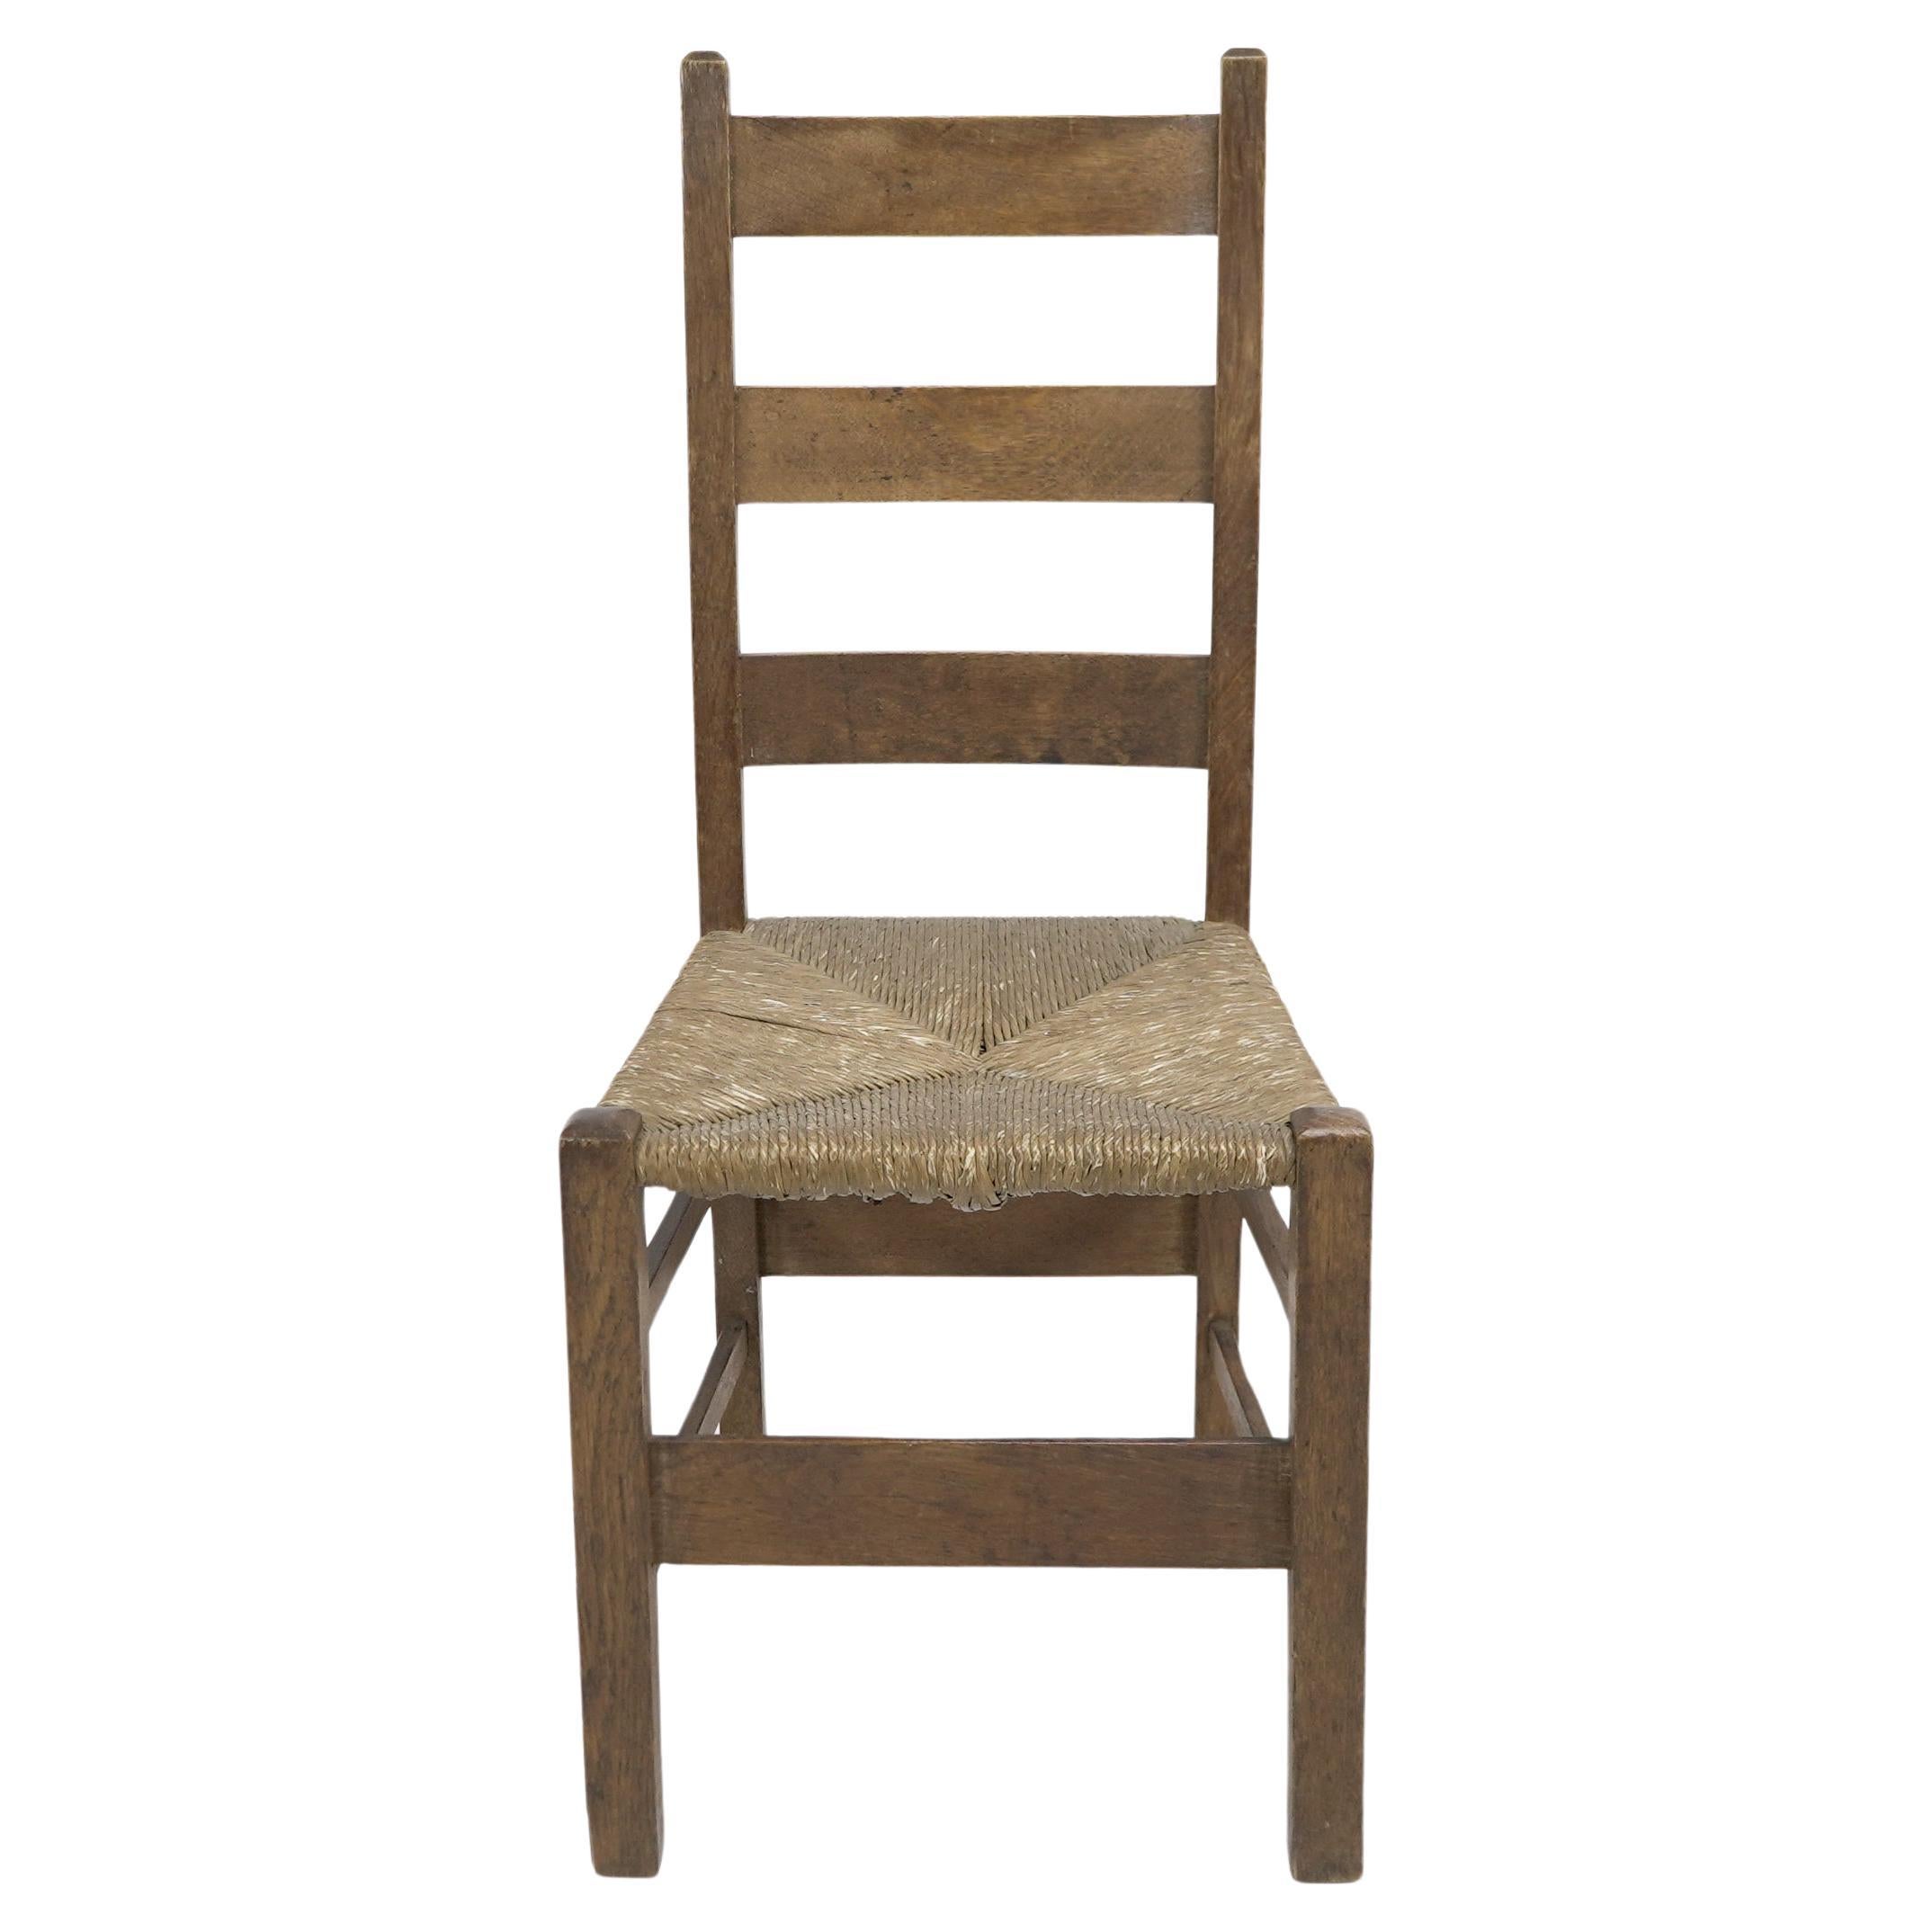 Heals. London. An Arts and Crafts ladderback with original rush seat